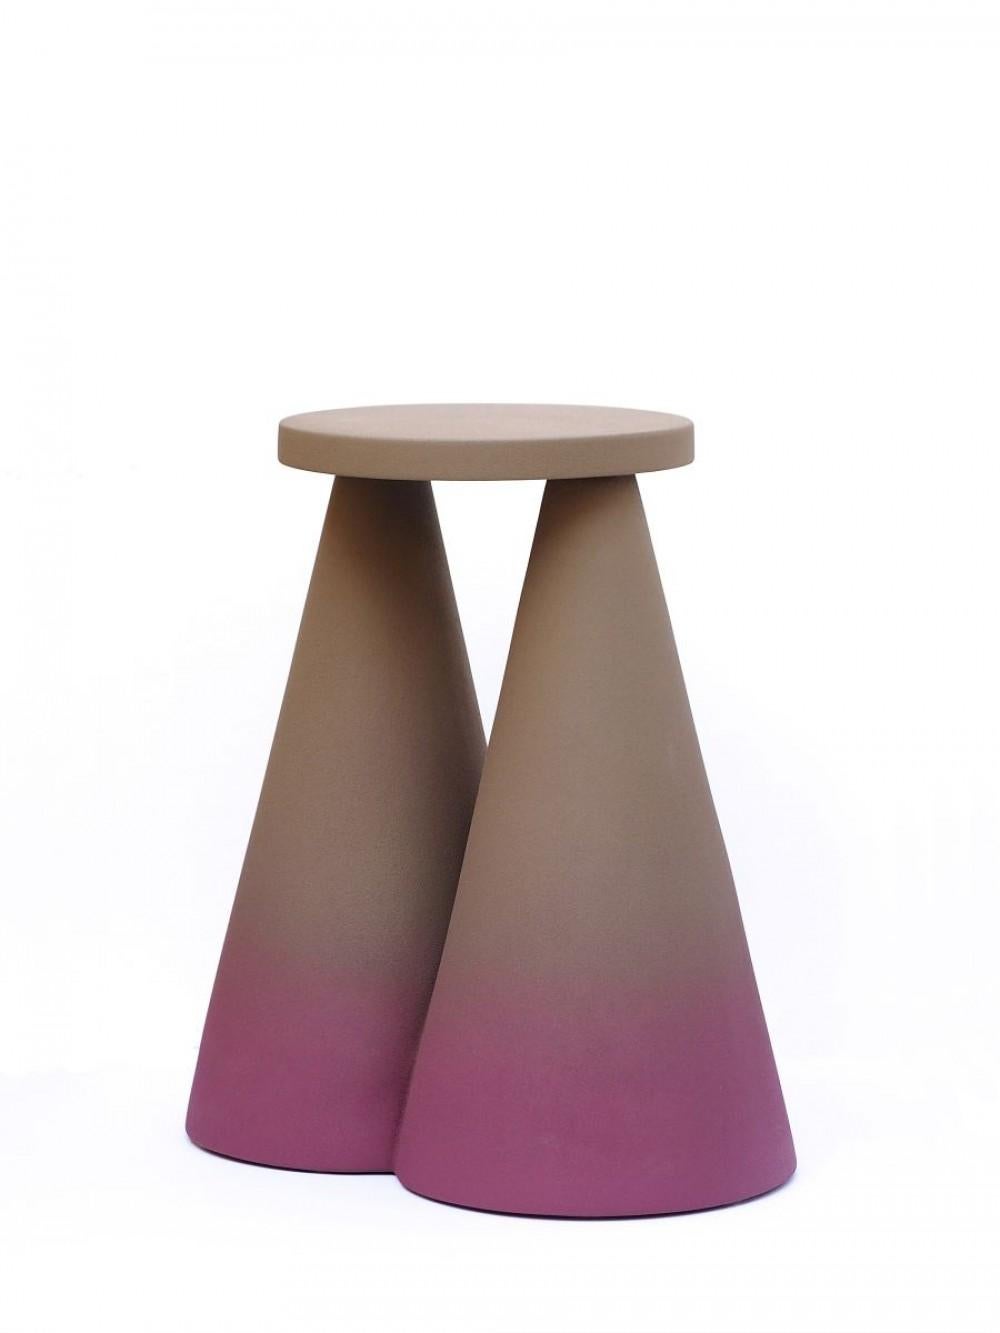 Isola side table by Cara Davide
Dimensions: 25 x 43 x H 45 
Materials: ceramic / rough touch finishing

Isola side table is completely made in ceramic using high temperature furnace, to make the material stronger. The large base makes the object